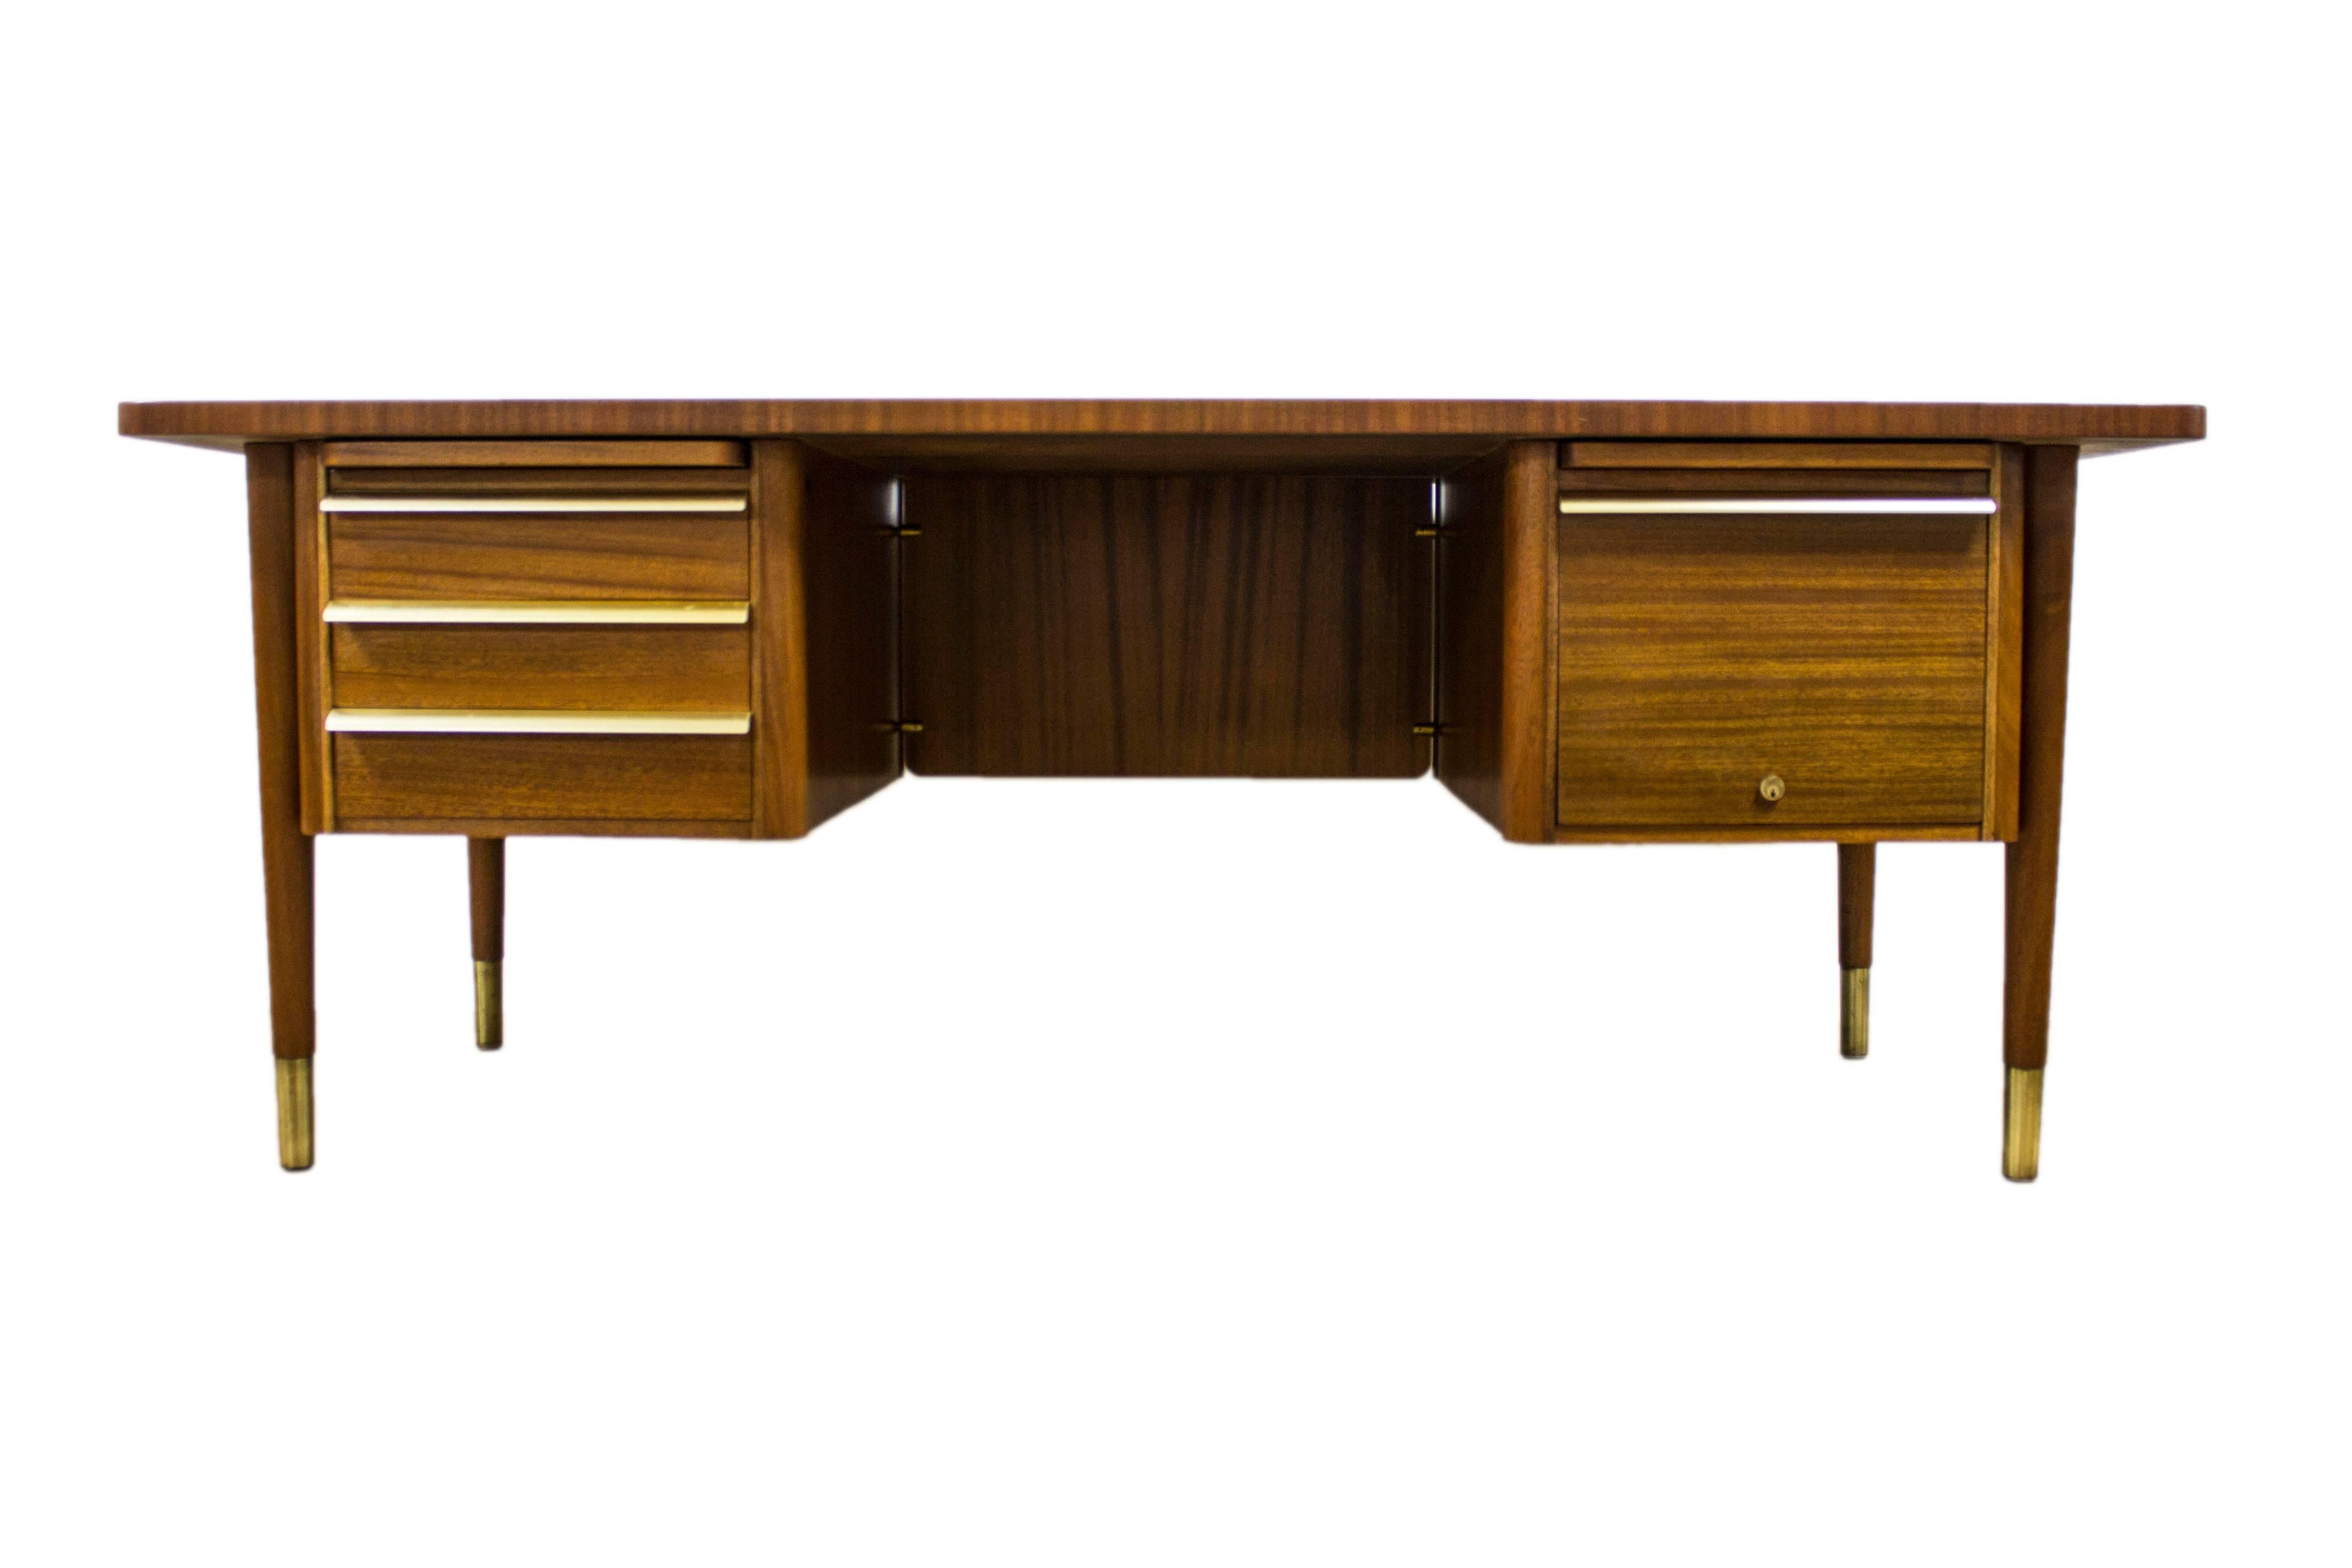 Abbess Furniture produced functional and highly desirable furniture throughout their history and were particularly favoured for their stunning and versatile desk designs which were the staple of academics and professionals alike. As seen on retro